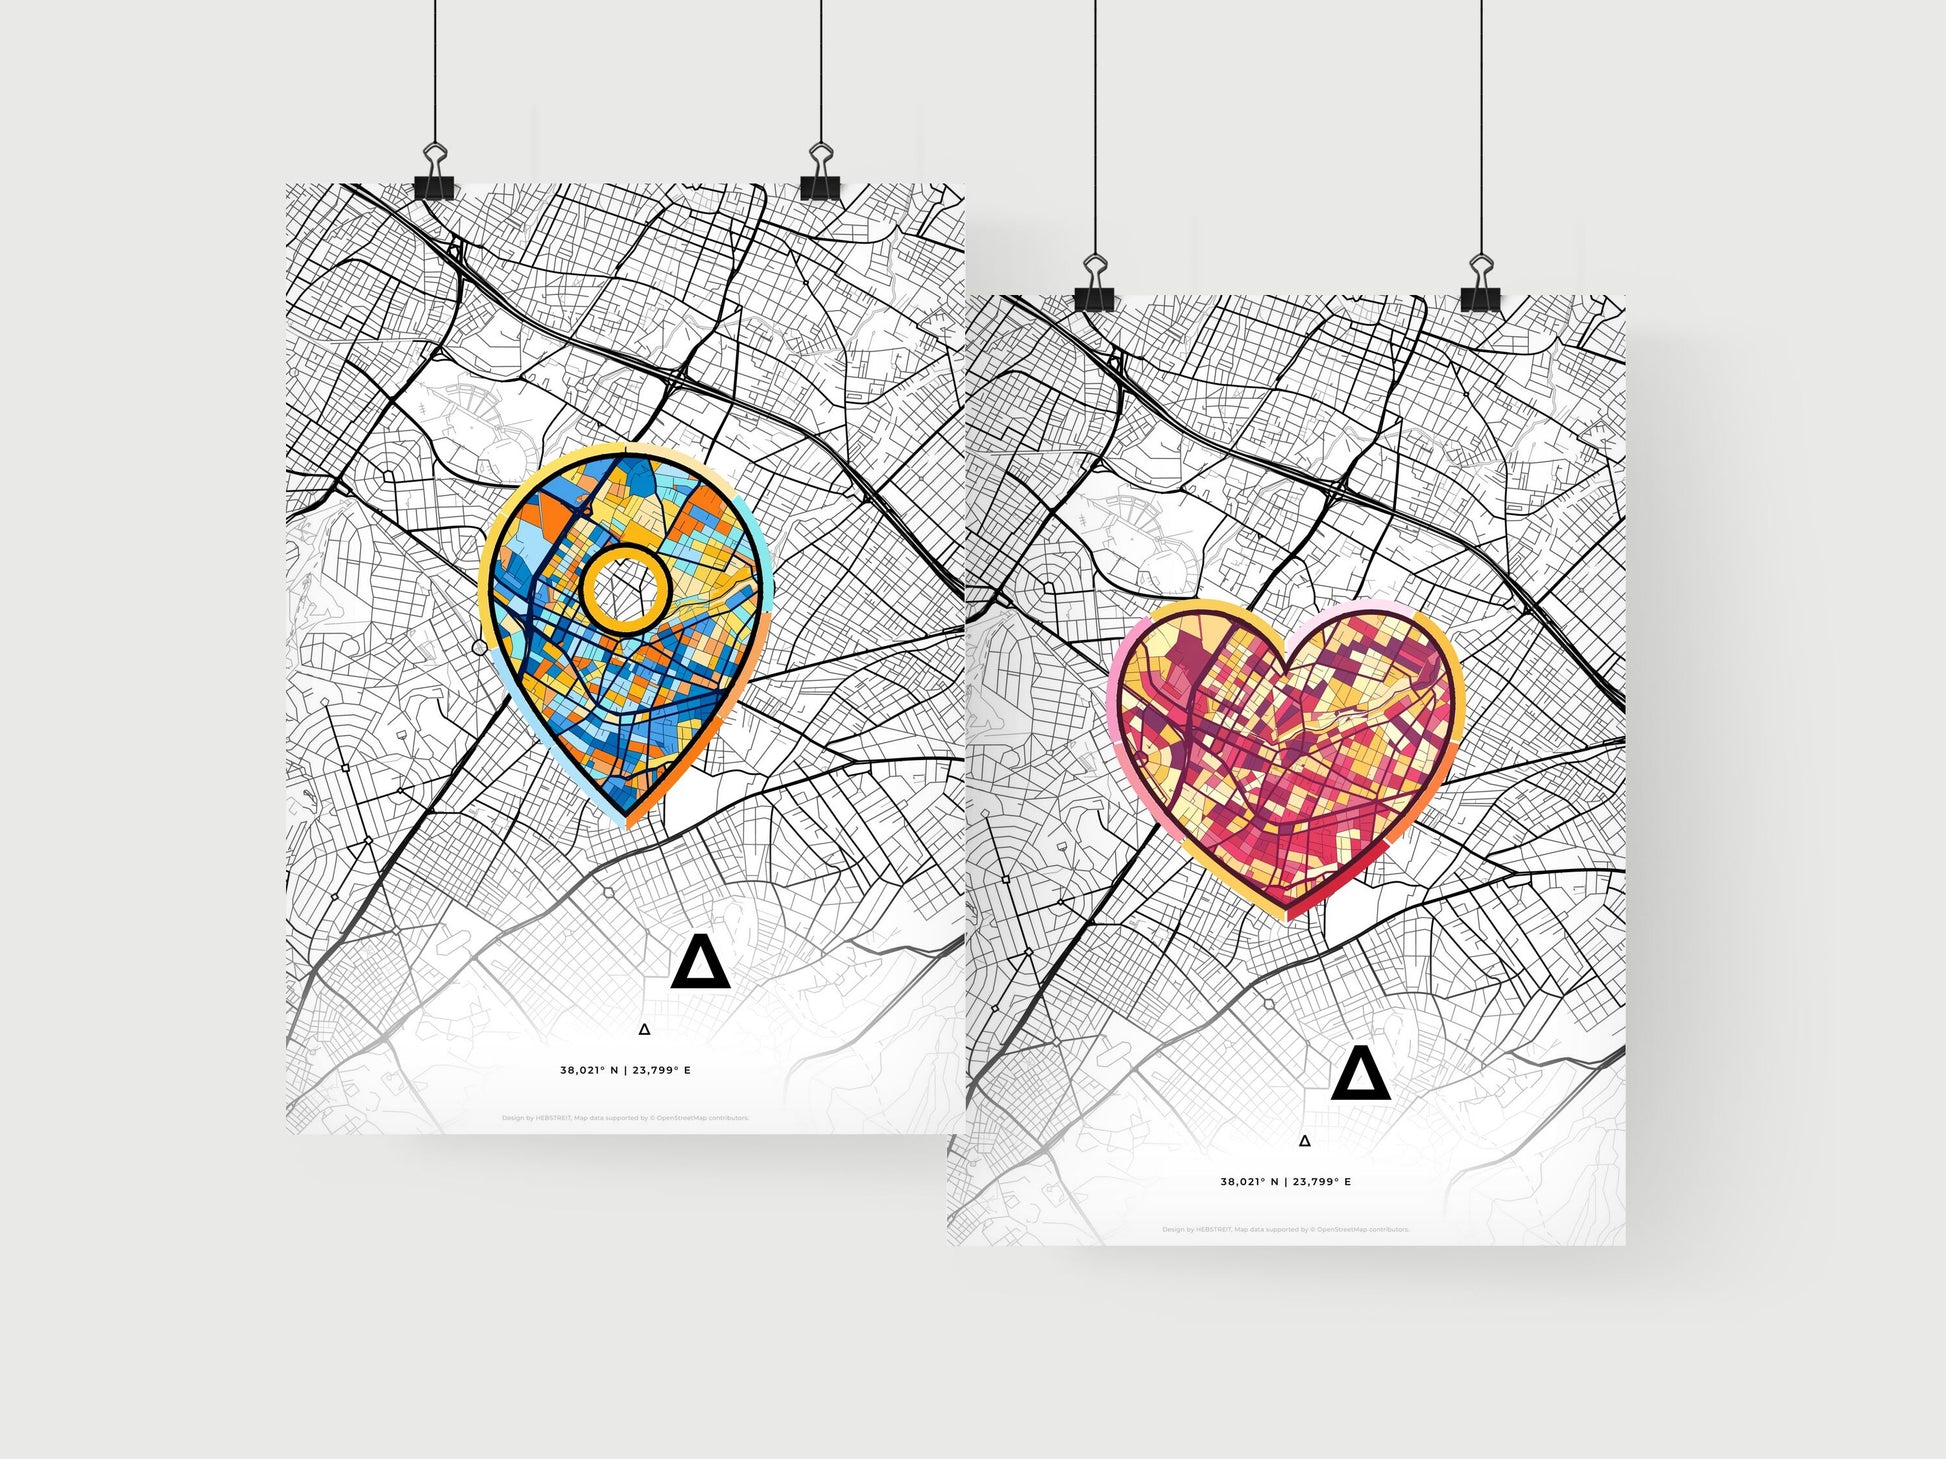 CHALANDRI GREECE minimal art map with a colorful icon. Where it all began, Couple map gift.